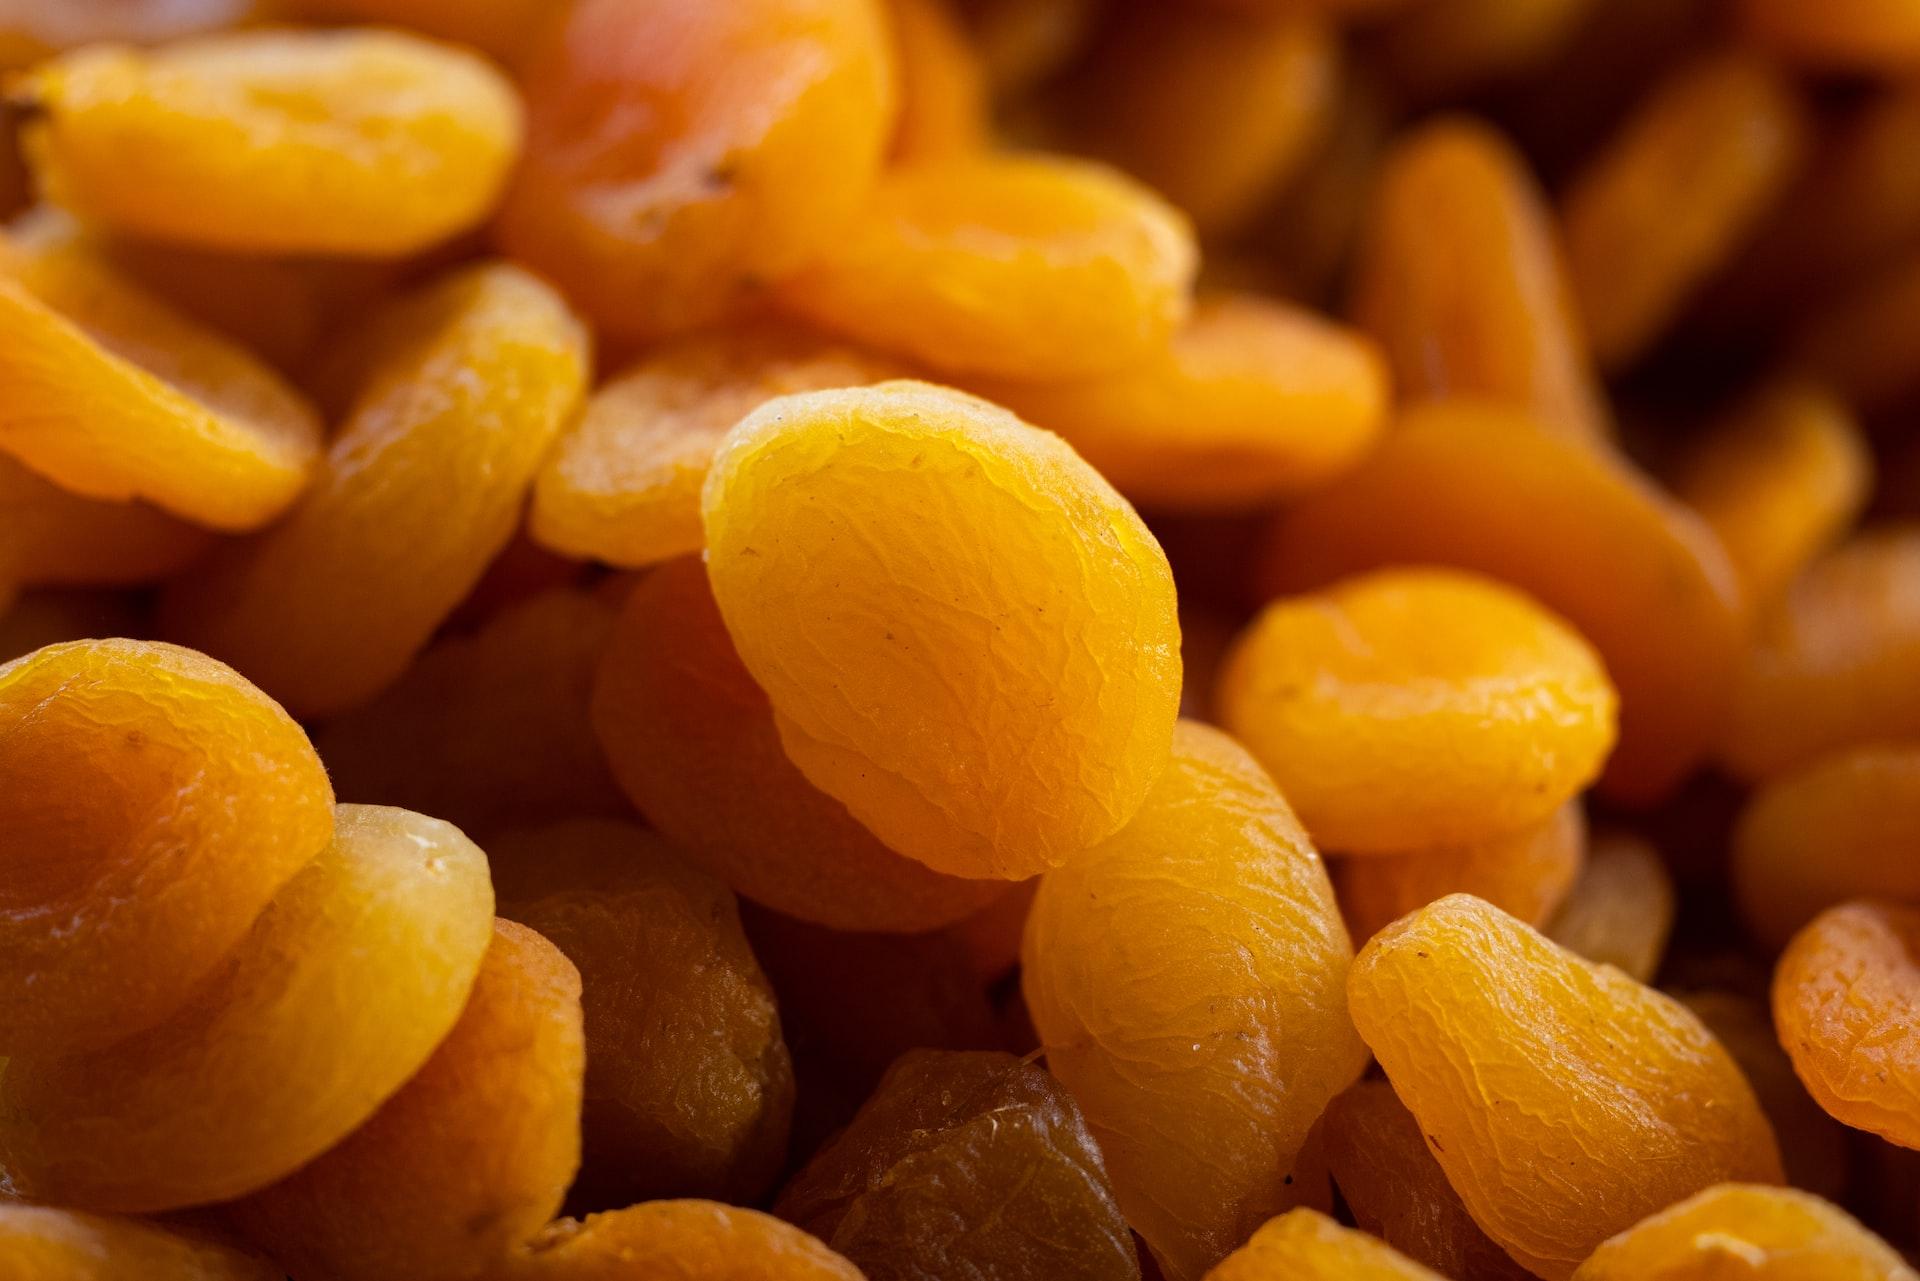 a close up of a pile of peeled oranges